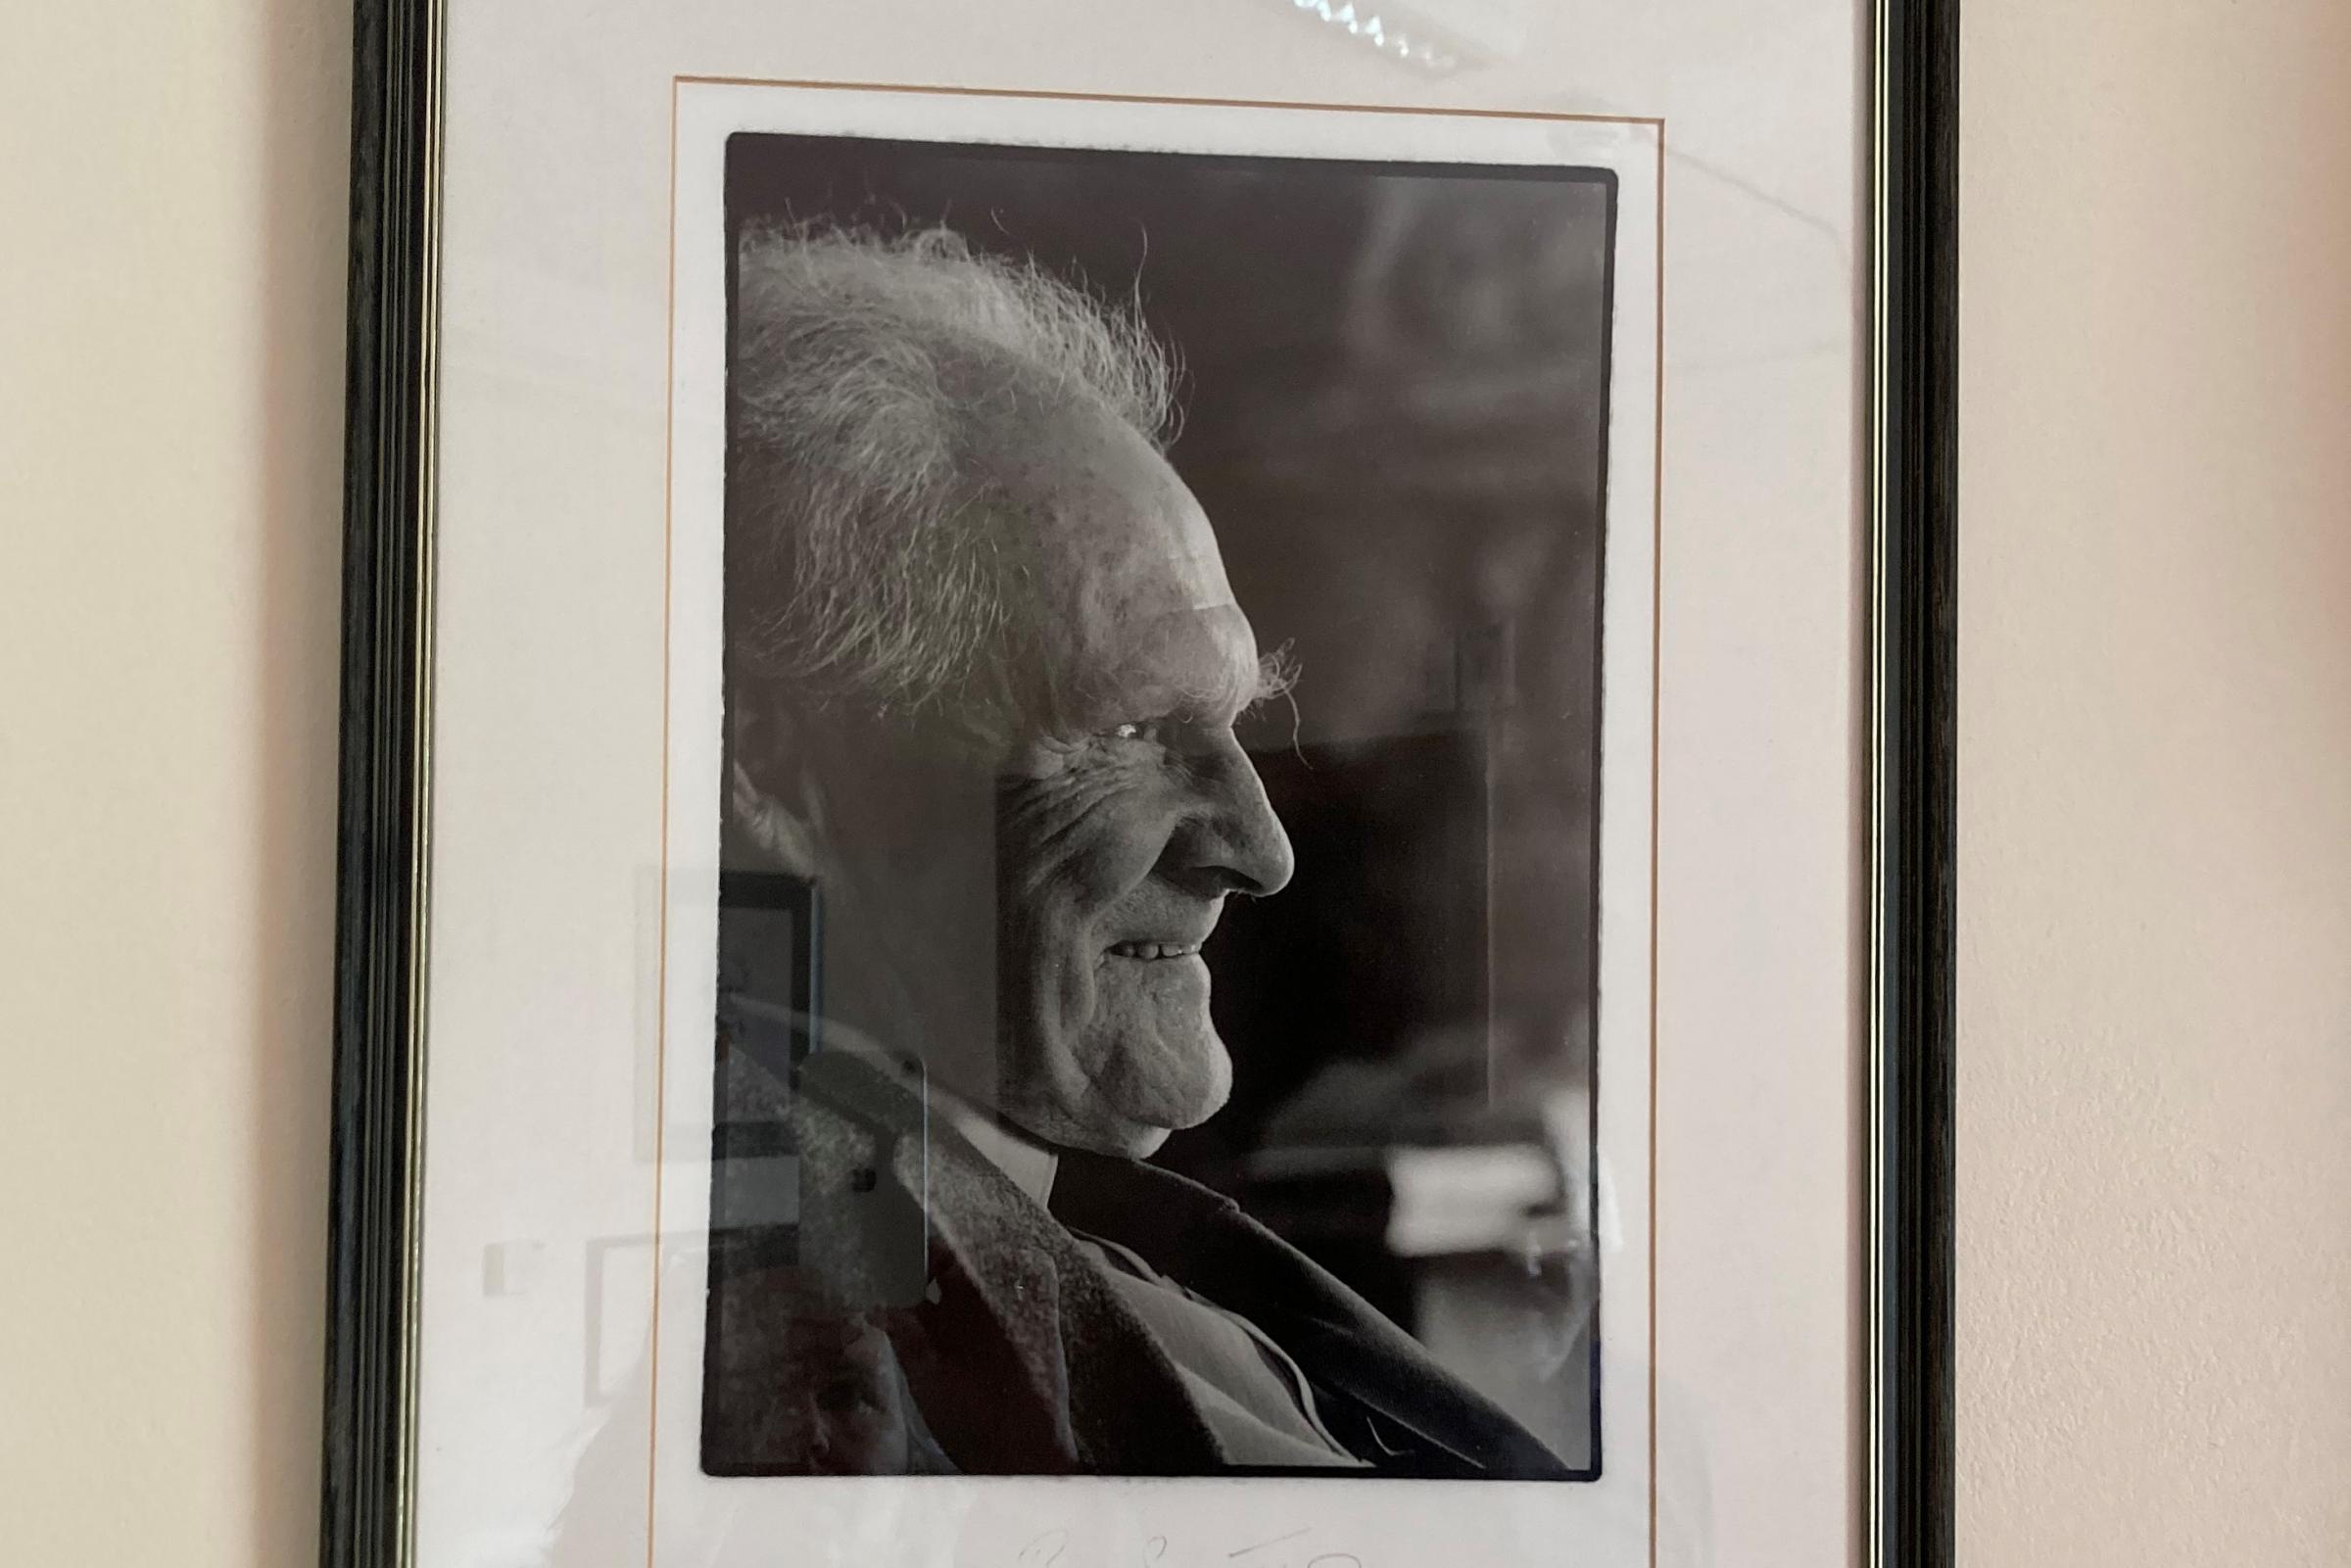 One of the photos of R.S. Thomas which hangs on the wall.